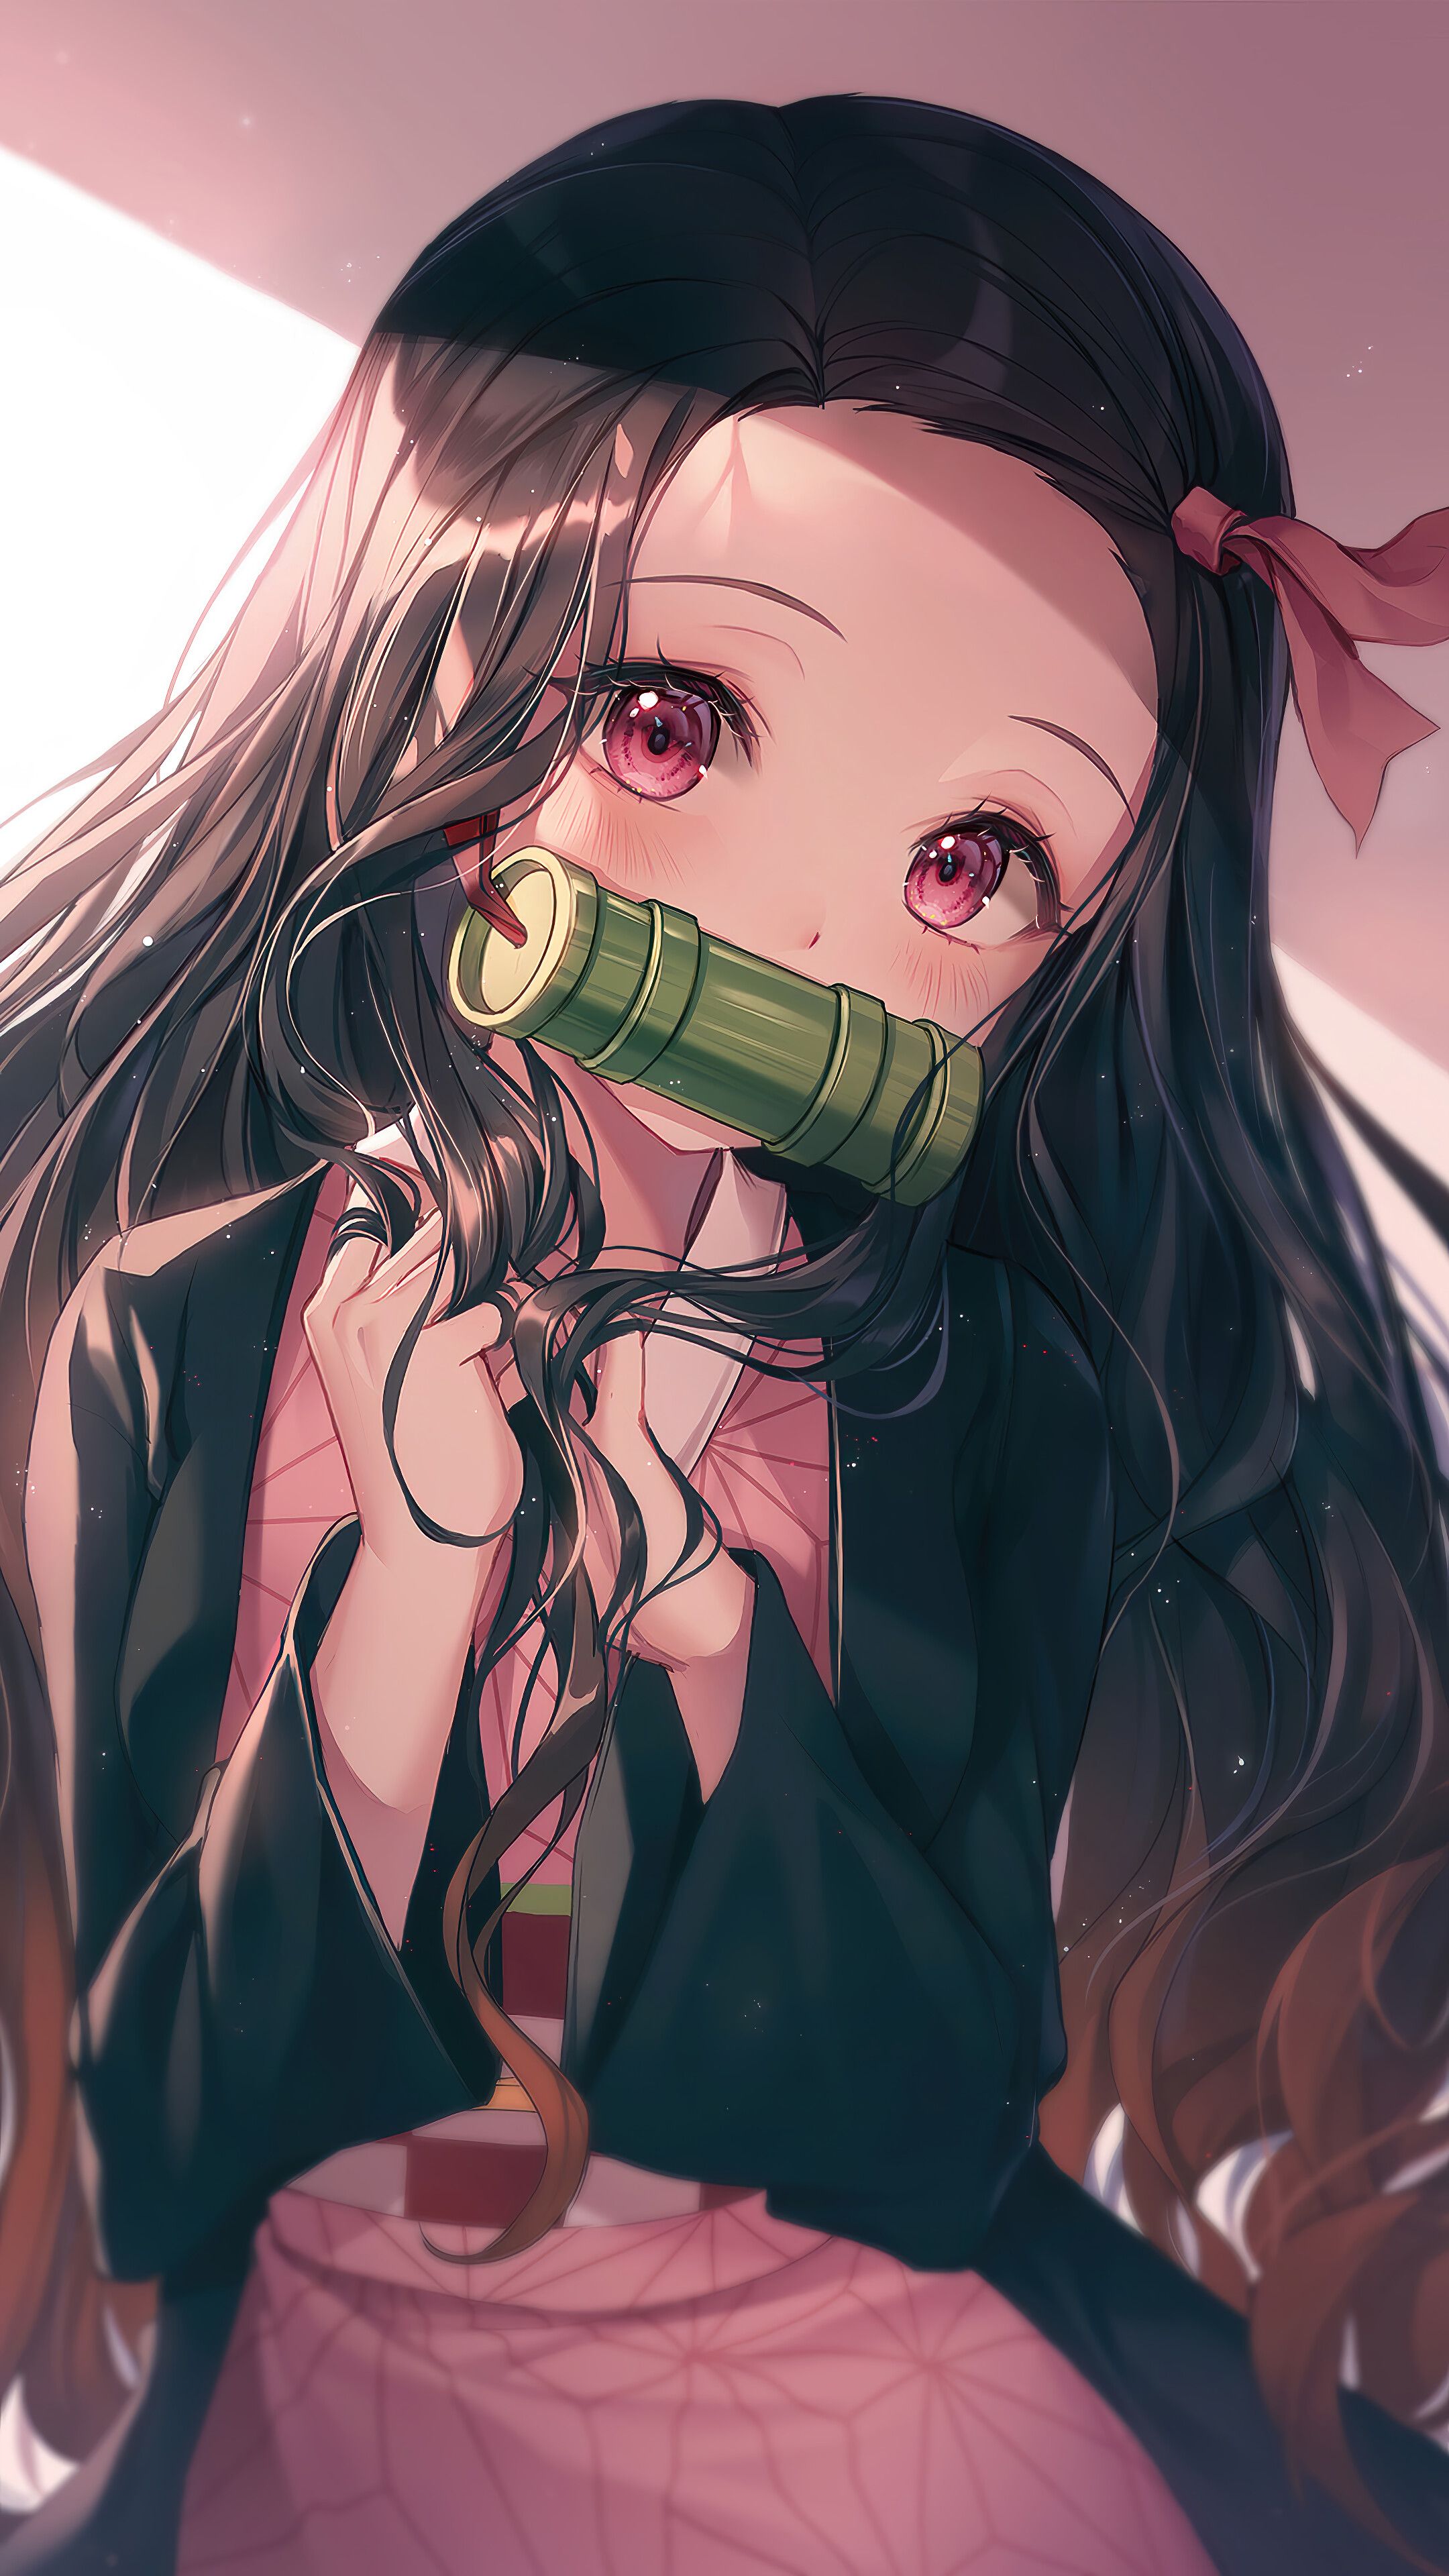 A long-haired anime girl with a green face mask. - Nezuko